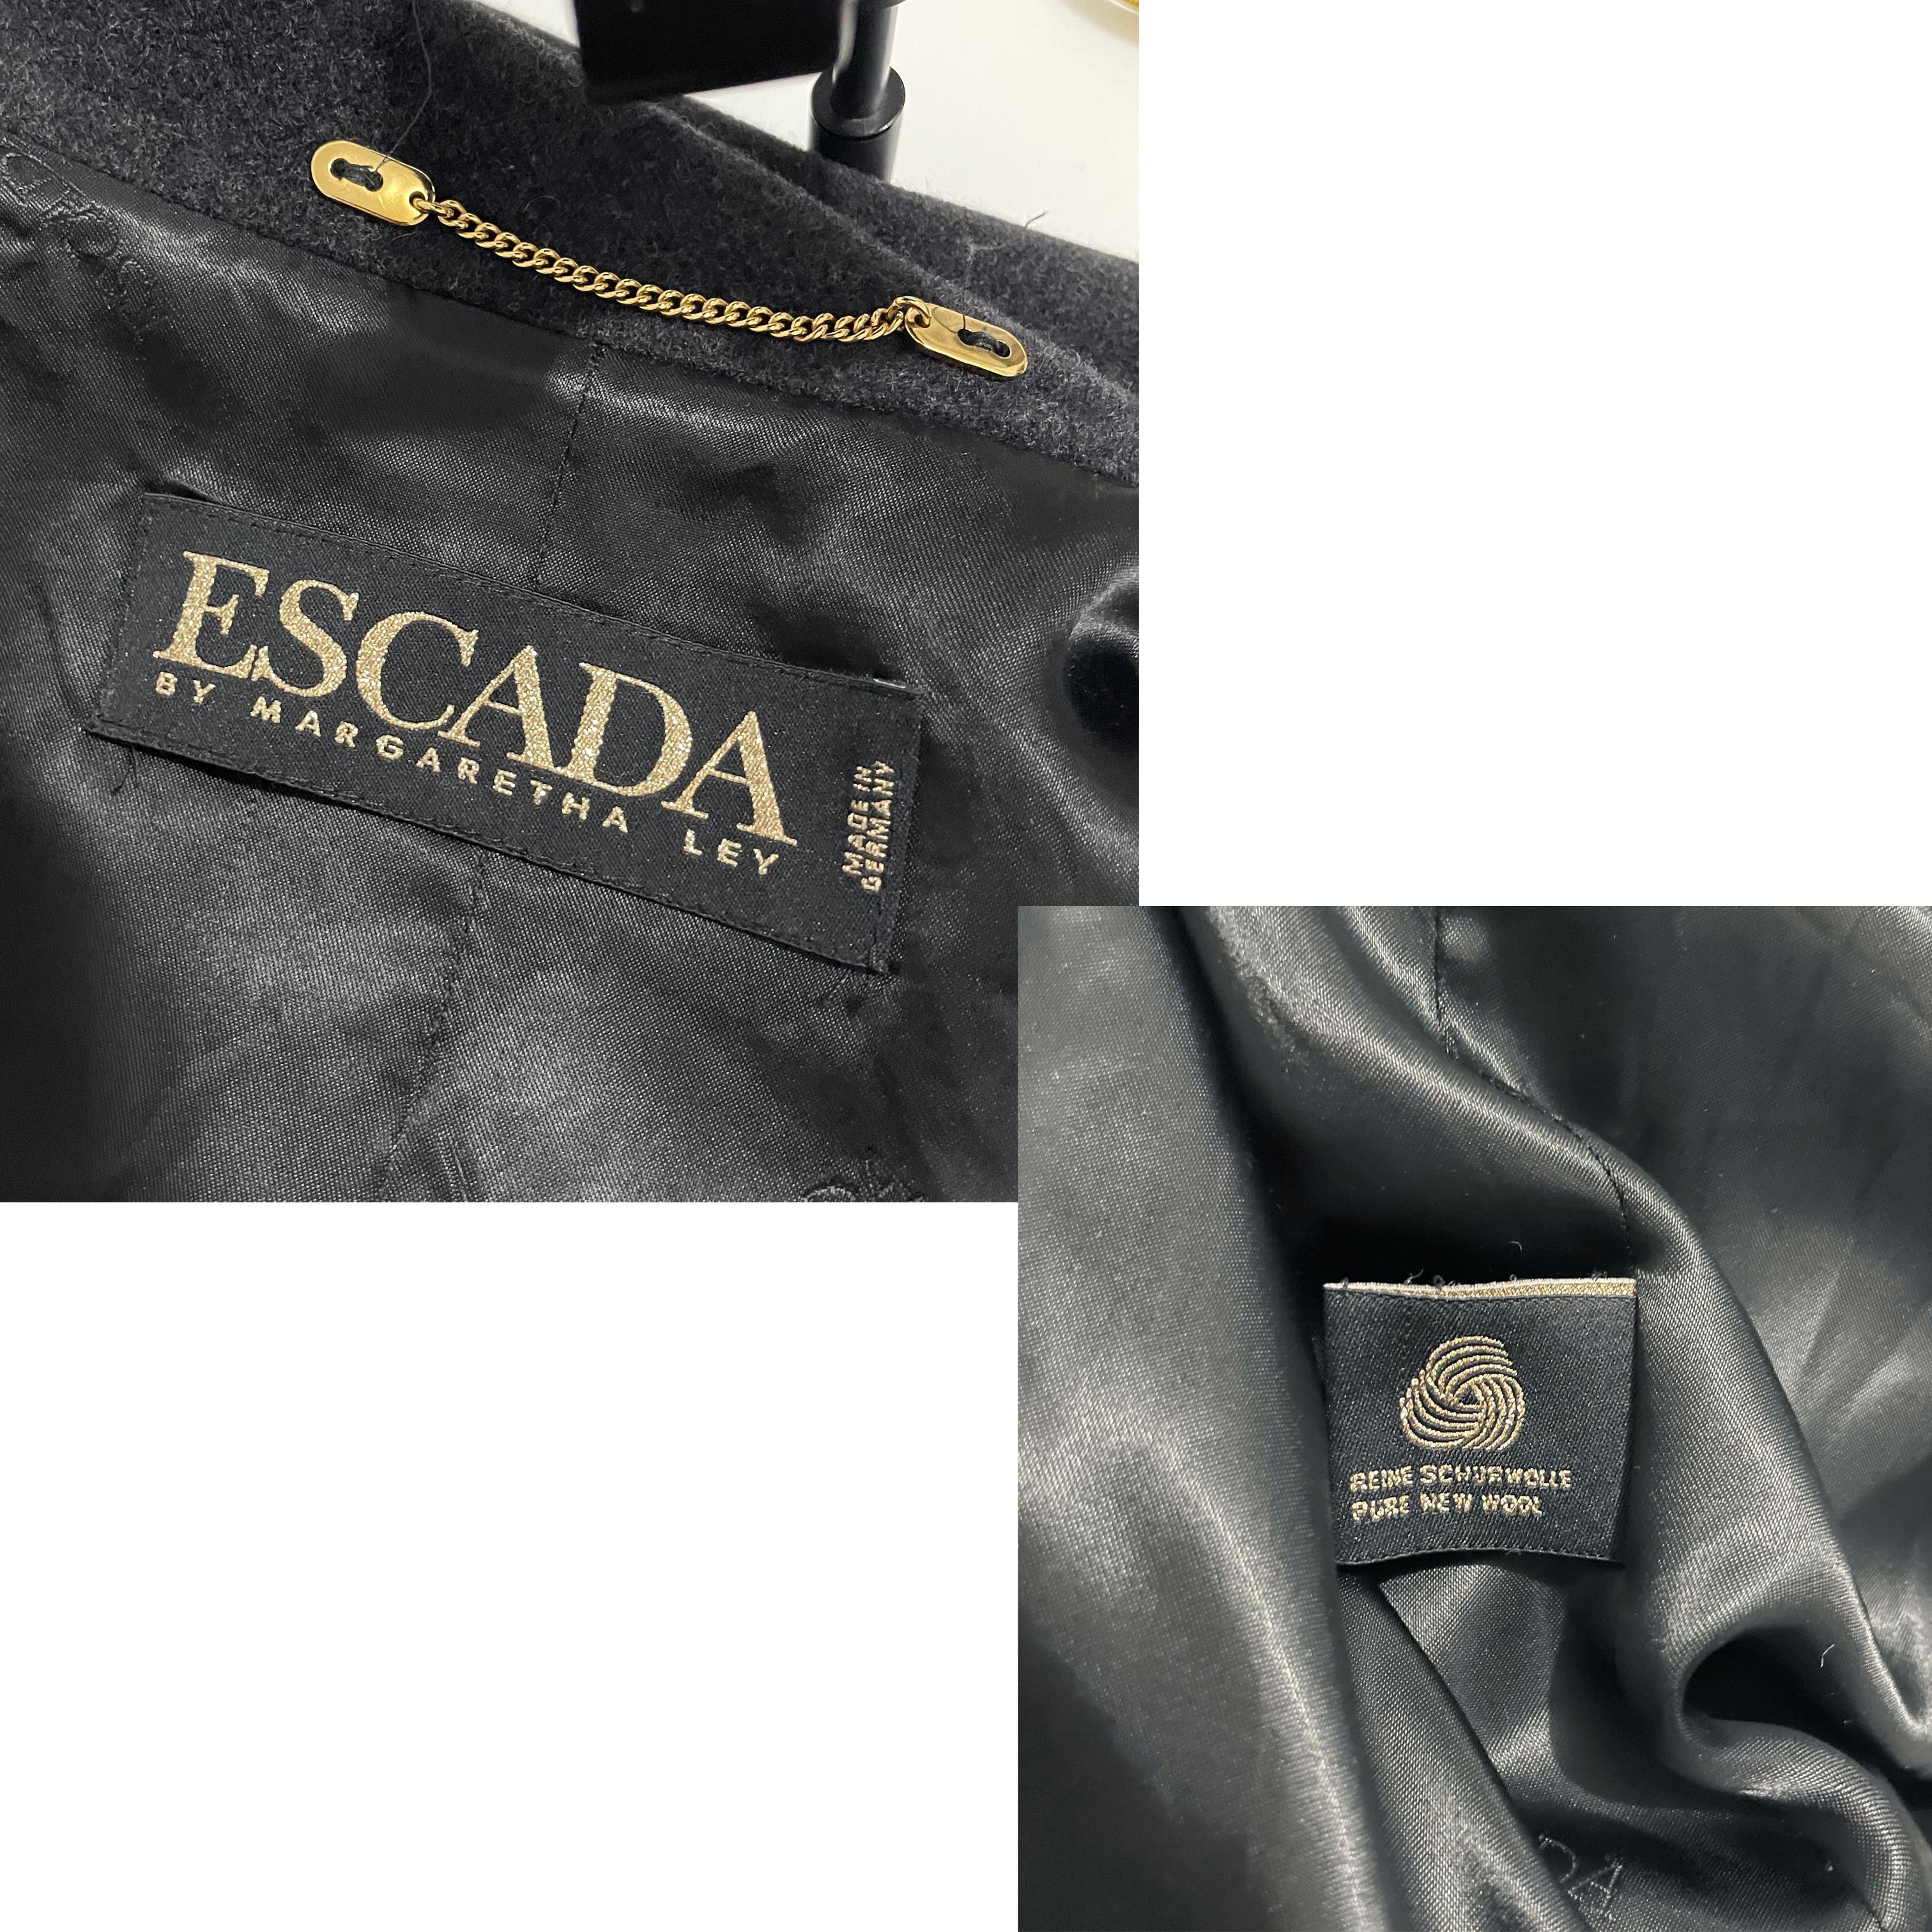 Escada Coat Double Breasted Charcoal Gray Pure New Wool Trench Style Vintage M/L For Sale 7